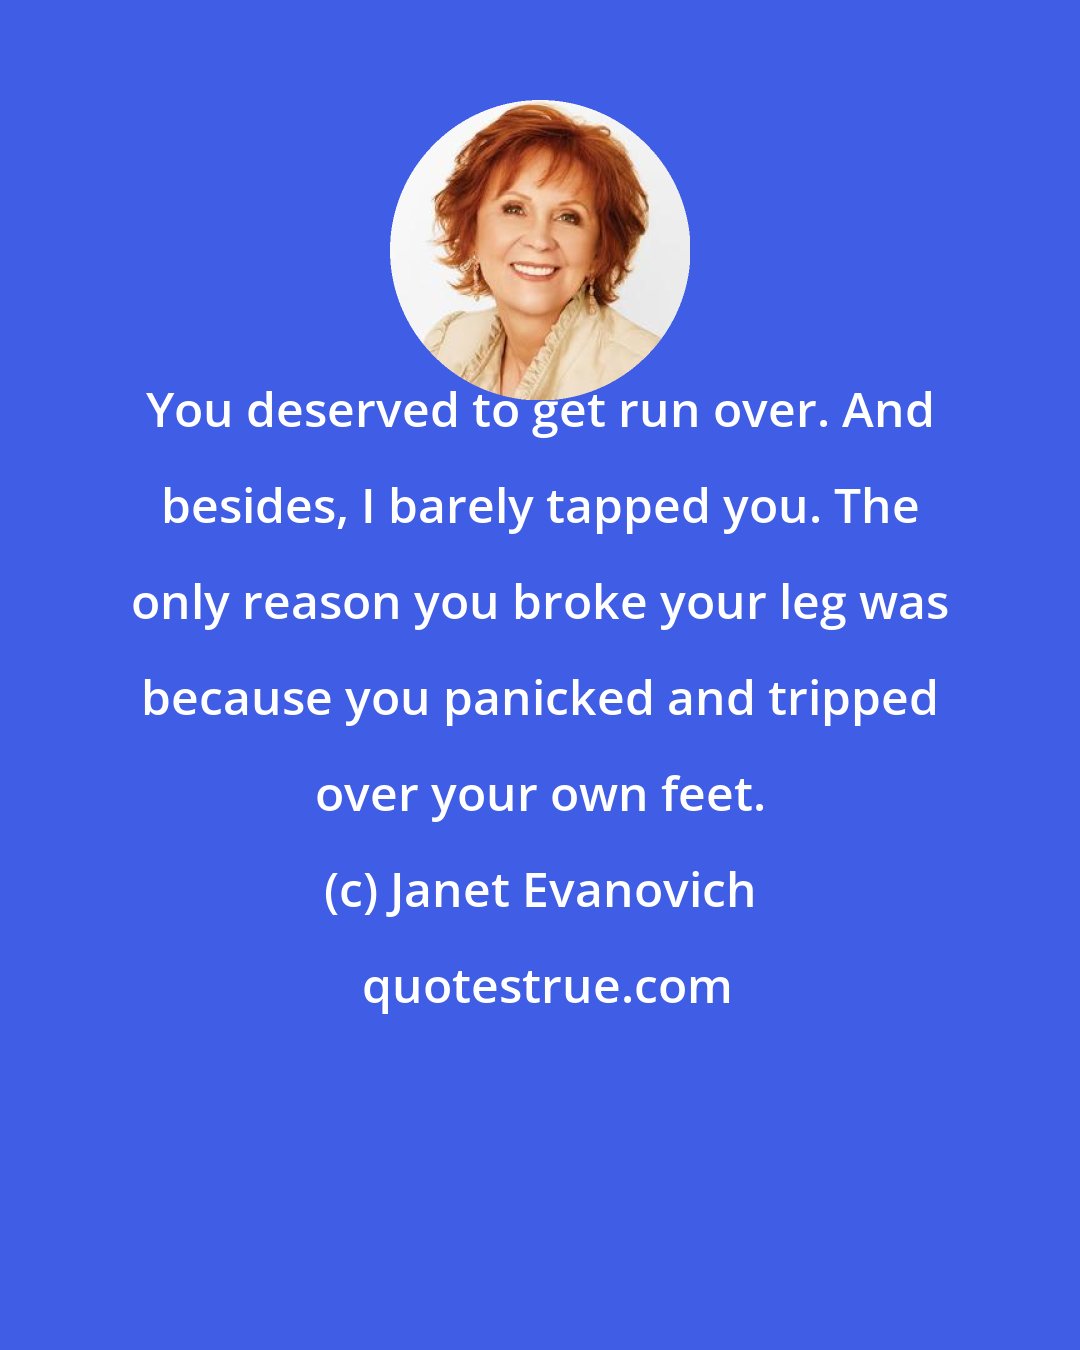 Janet Evanovich: You deserved to get run over. And besides, I barely tapped you. The only reason you broke your leg was because you panicked and tripped over your own feet.